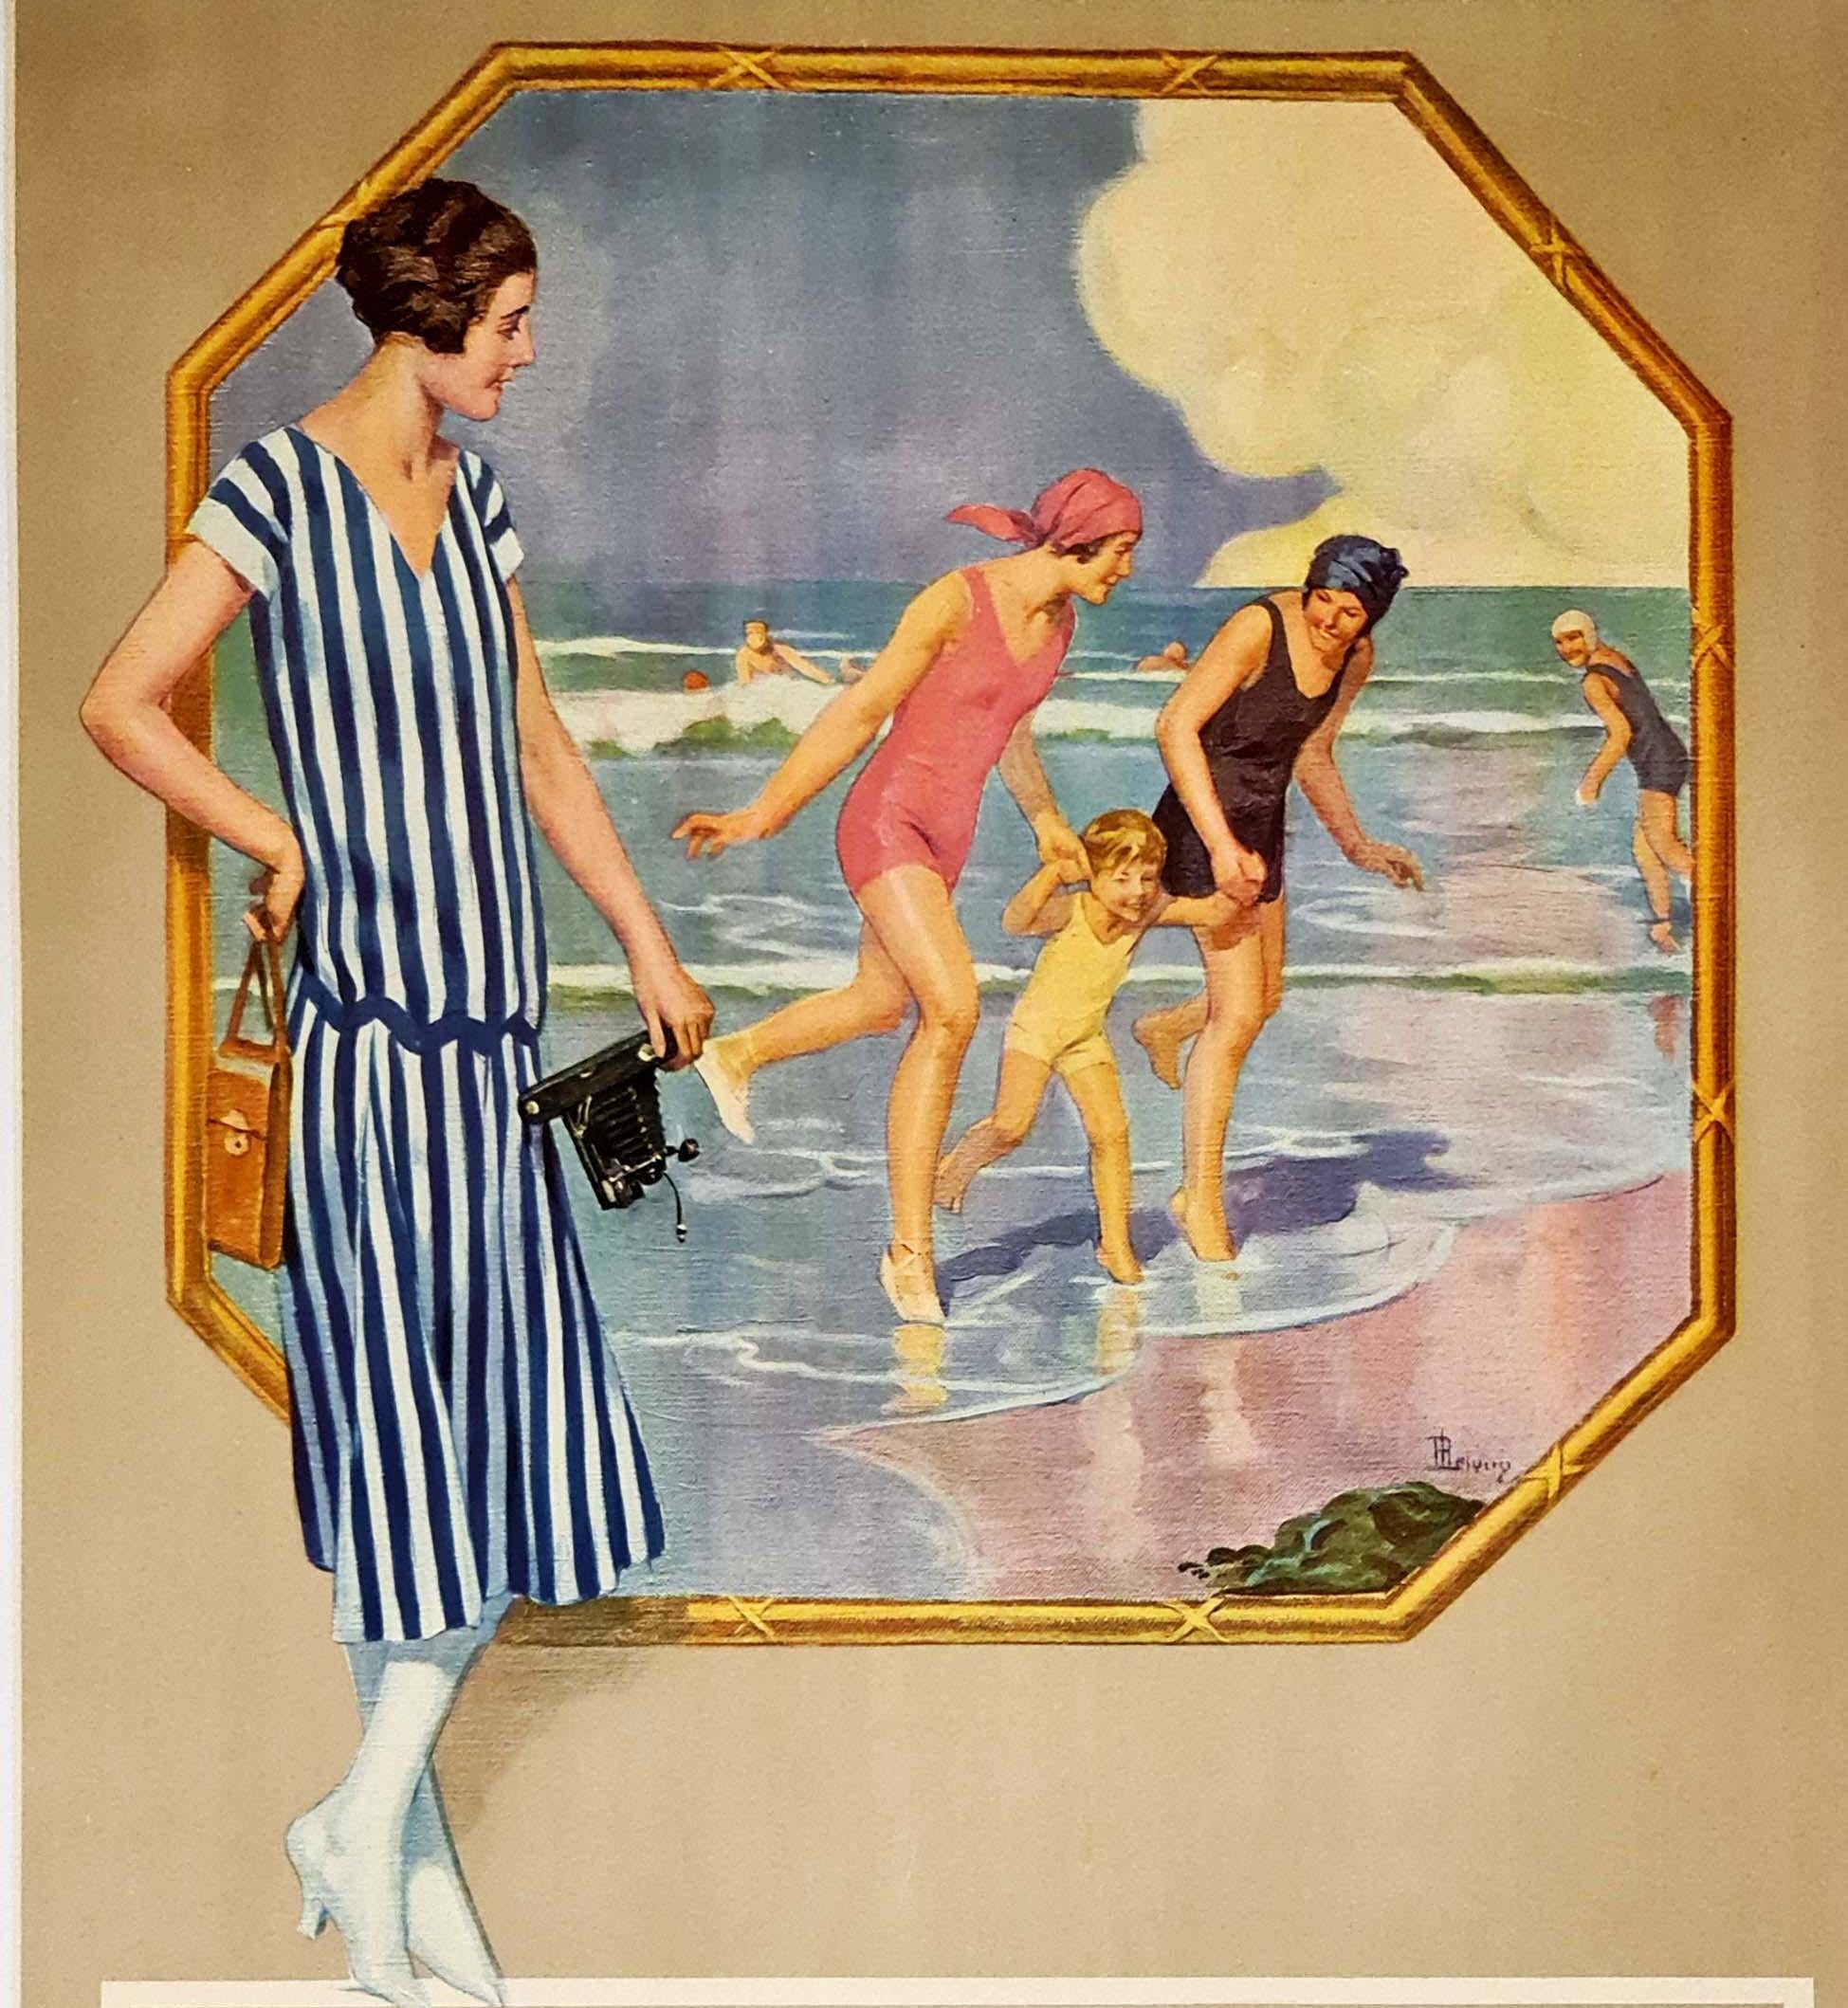 Beautiful advertising poster of the 1920s by René Lelong for the brand Kodak.

Kodak was founded by George Eastman and Henry A. Strong on May 23, 1892. For most of the 20th century, Kodak held a dominant position in the field of photographic